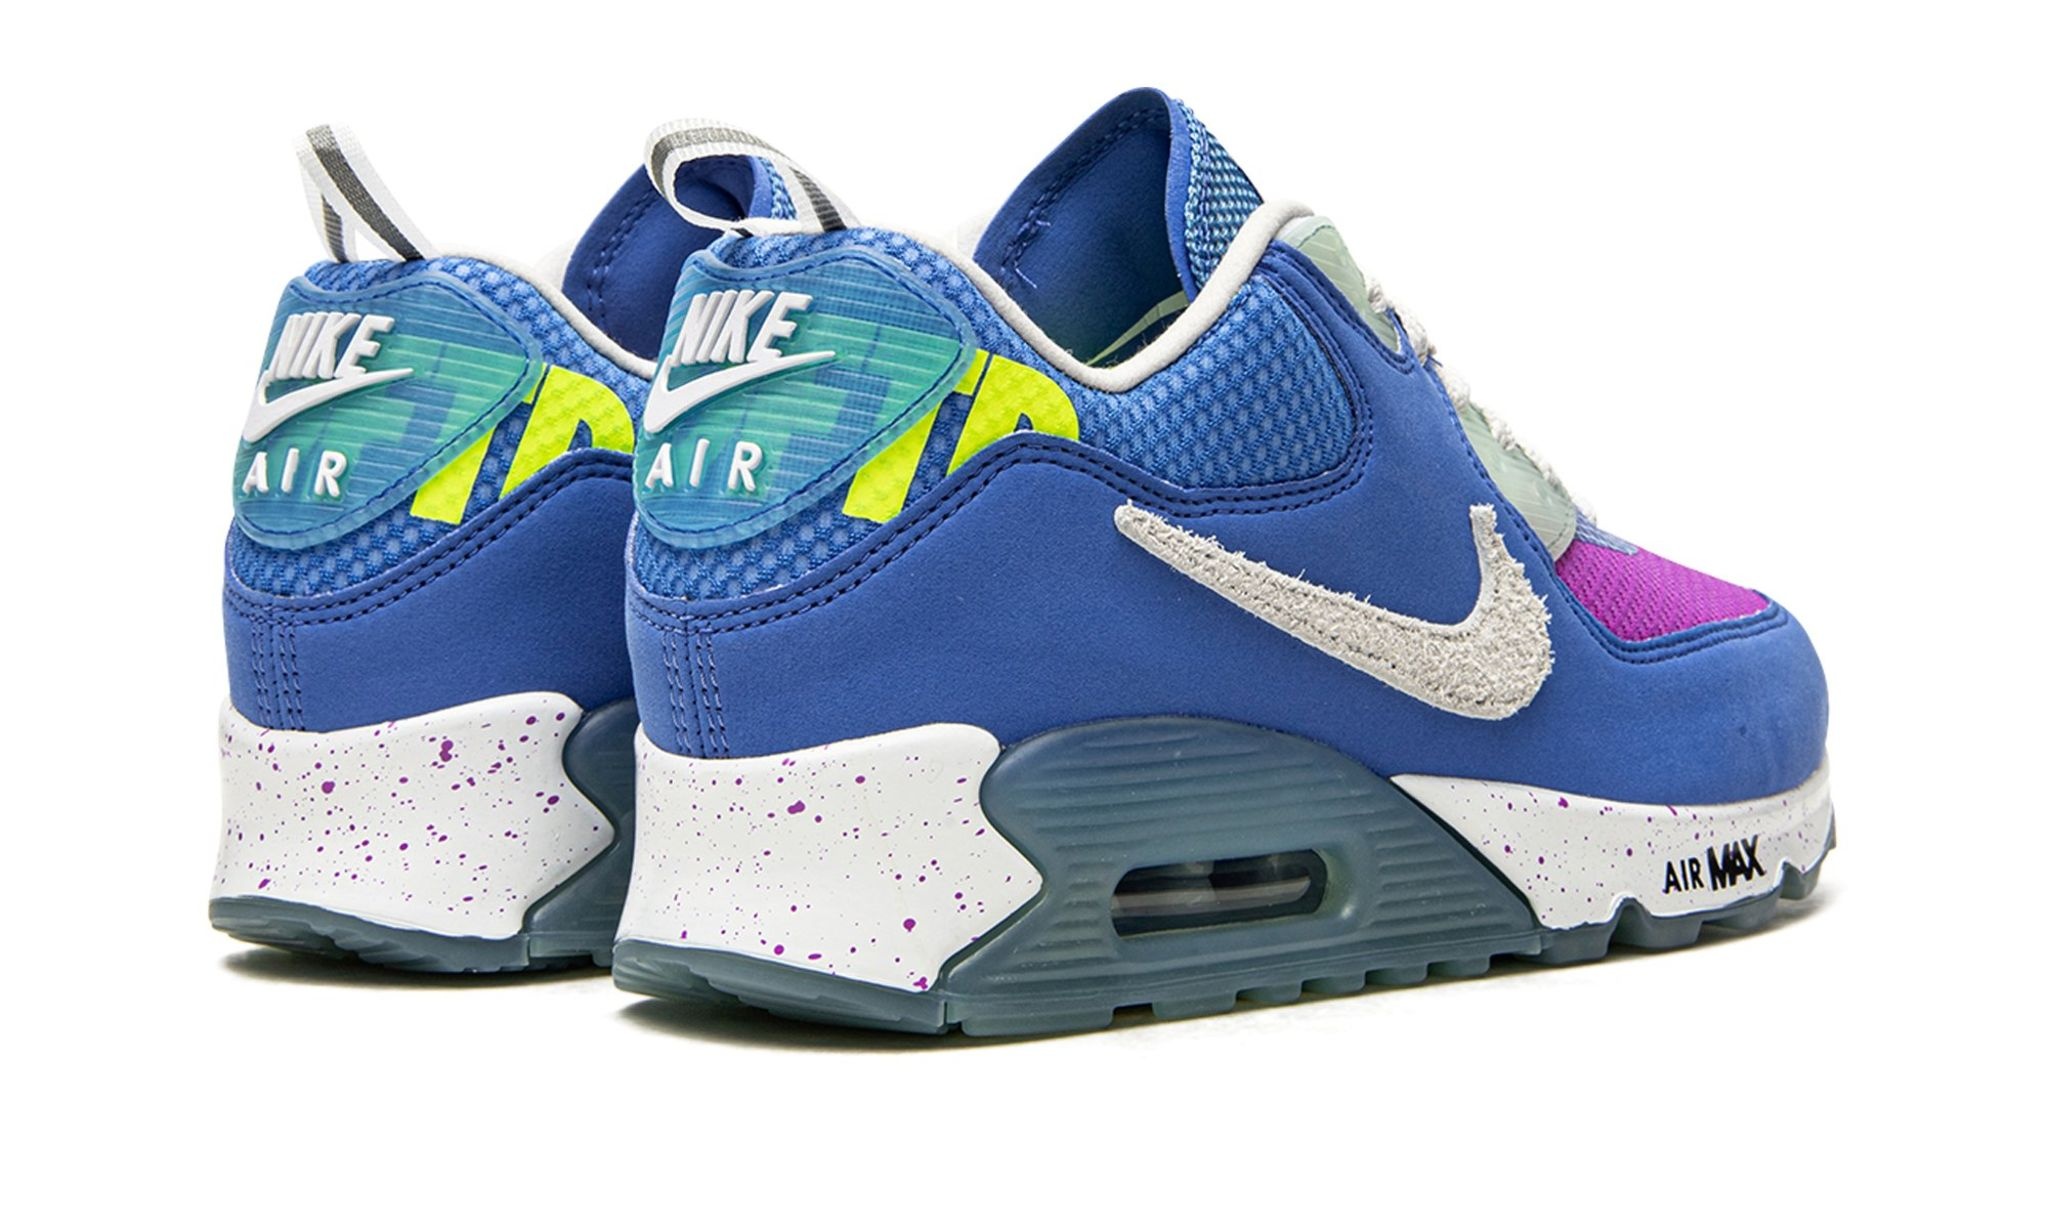 Air Max 90 "Undefeated - Pacific Blue" - 3